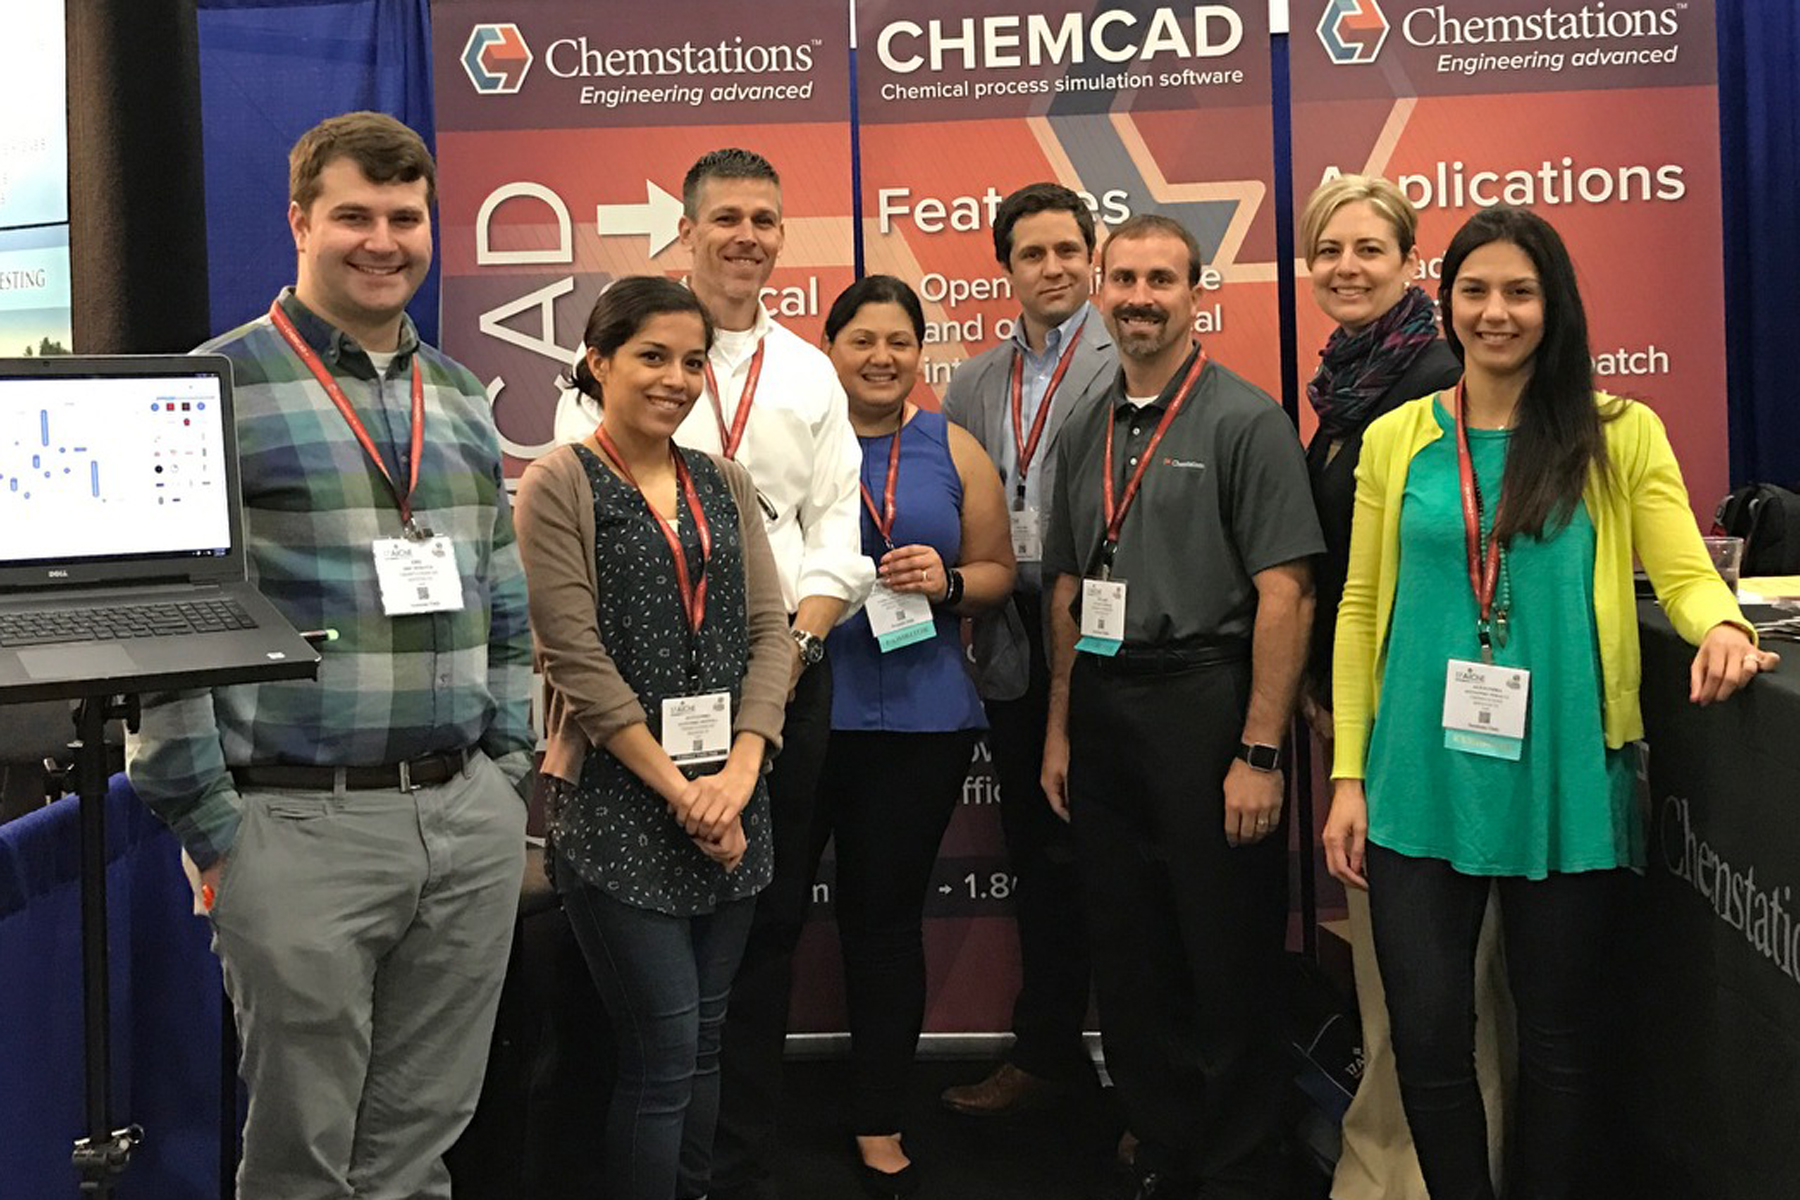 Chemstations staff at AIChE's 2017 Spring Meeting